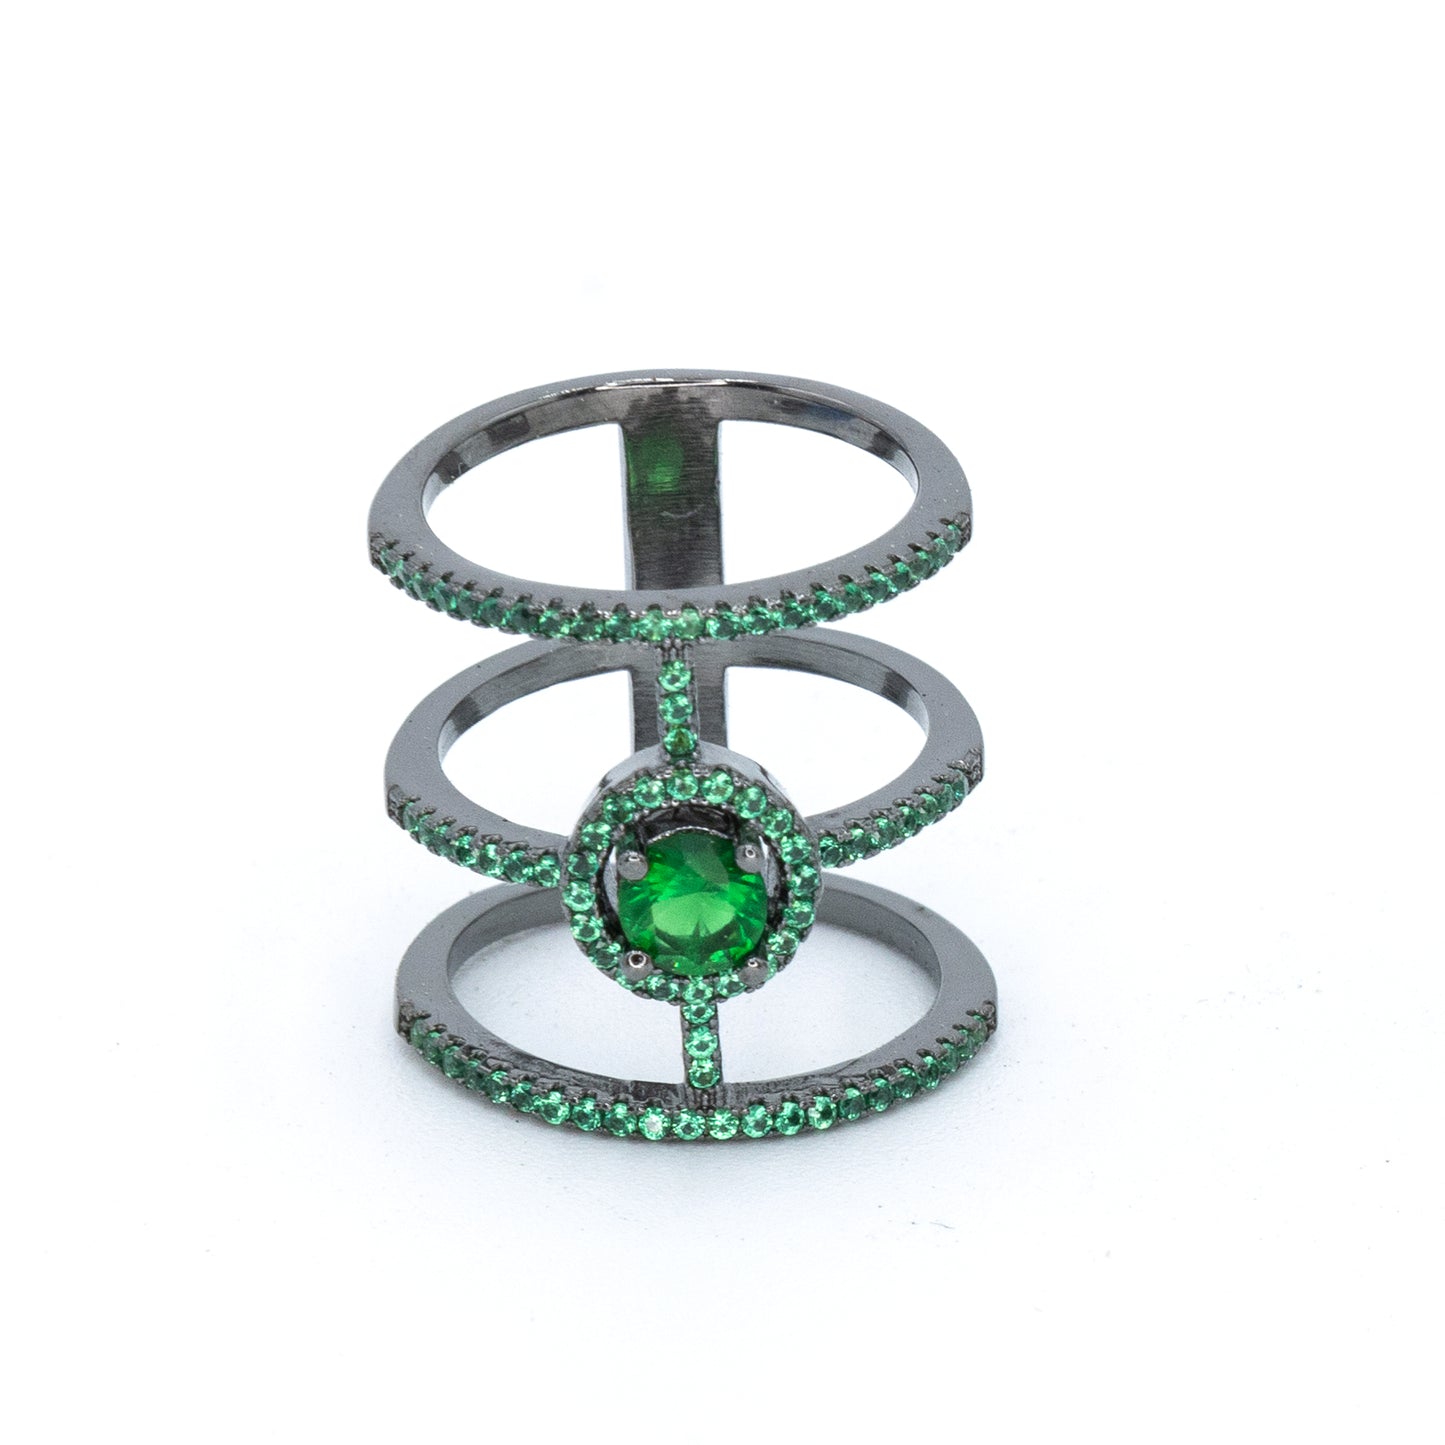 Triad pave ring w/ 3A Emerald CZ stones GM plated